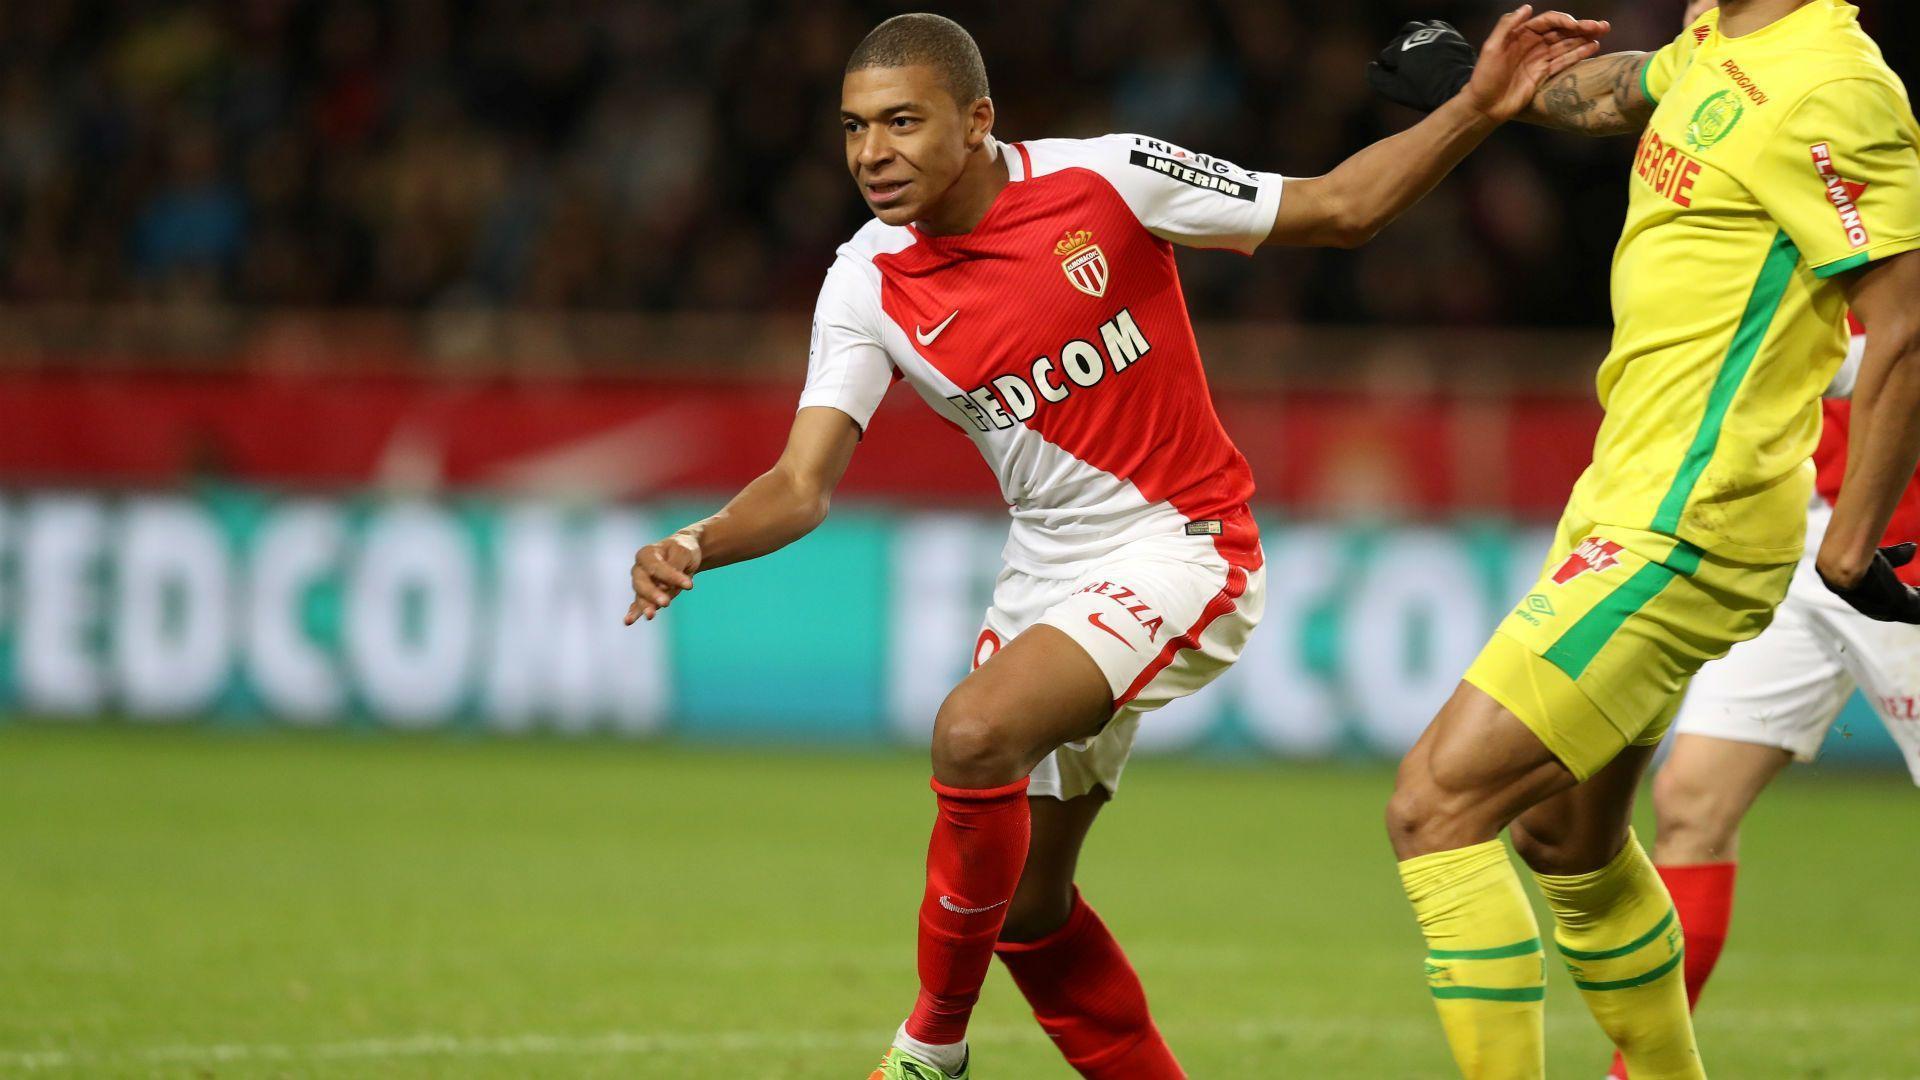 Kylian Mbappe HD Images Photos and Wallpapers Free